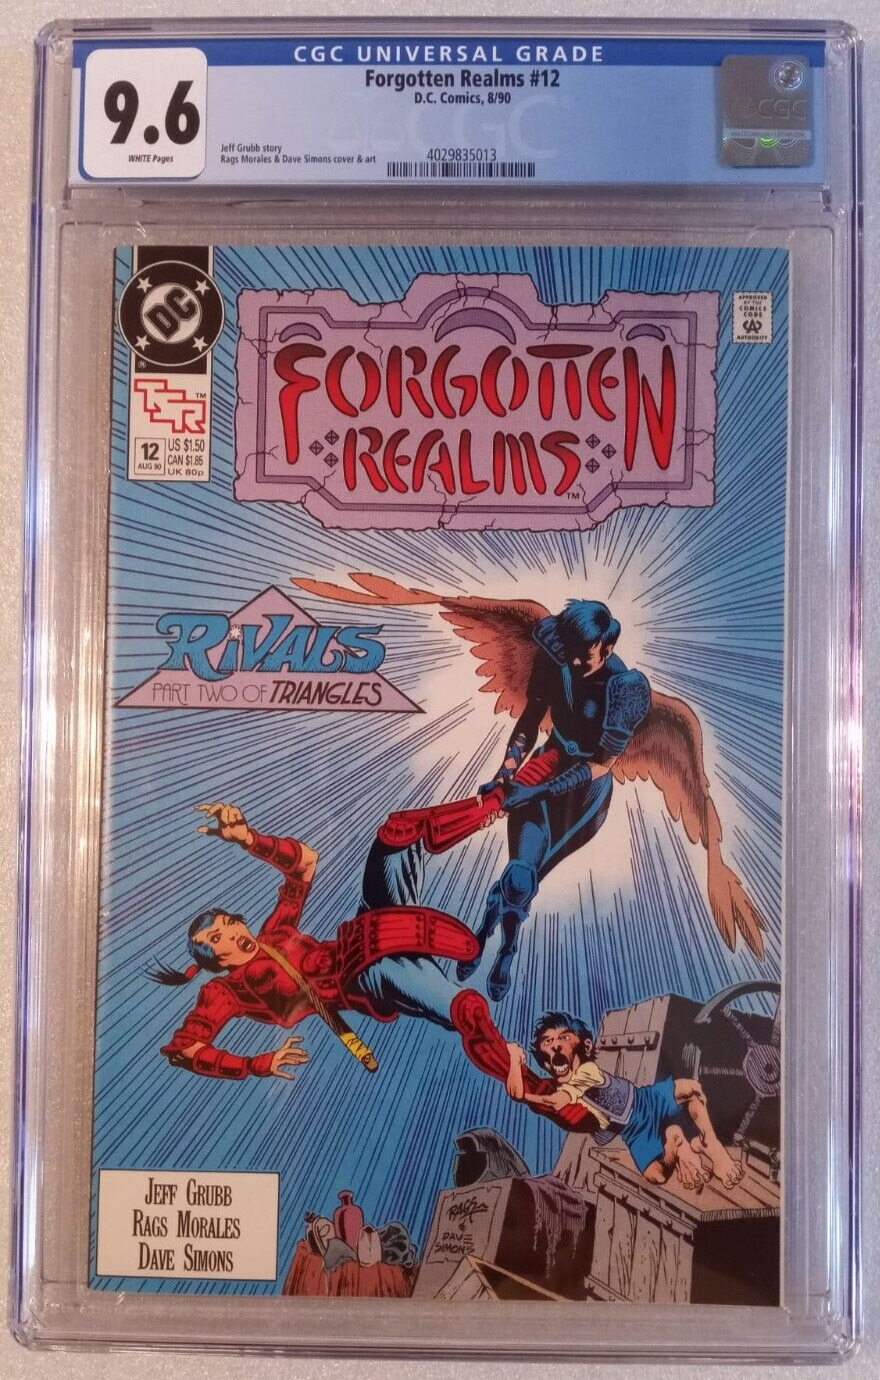 Forgotten Realms #12 DC Comics 1990 CGC 9.6 Near Mint+ White Pages